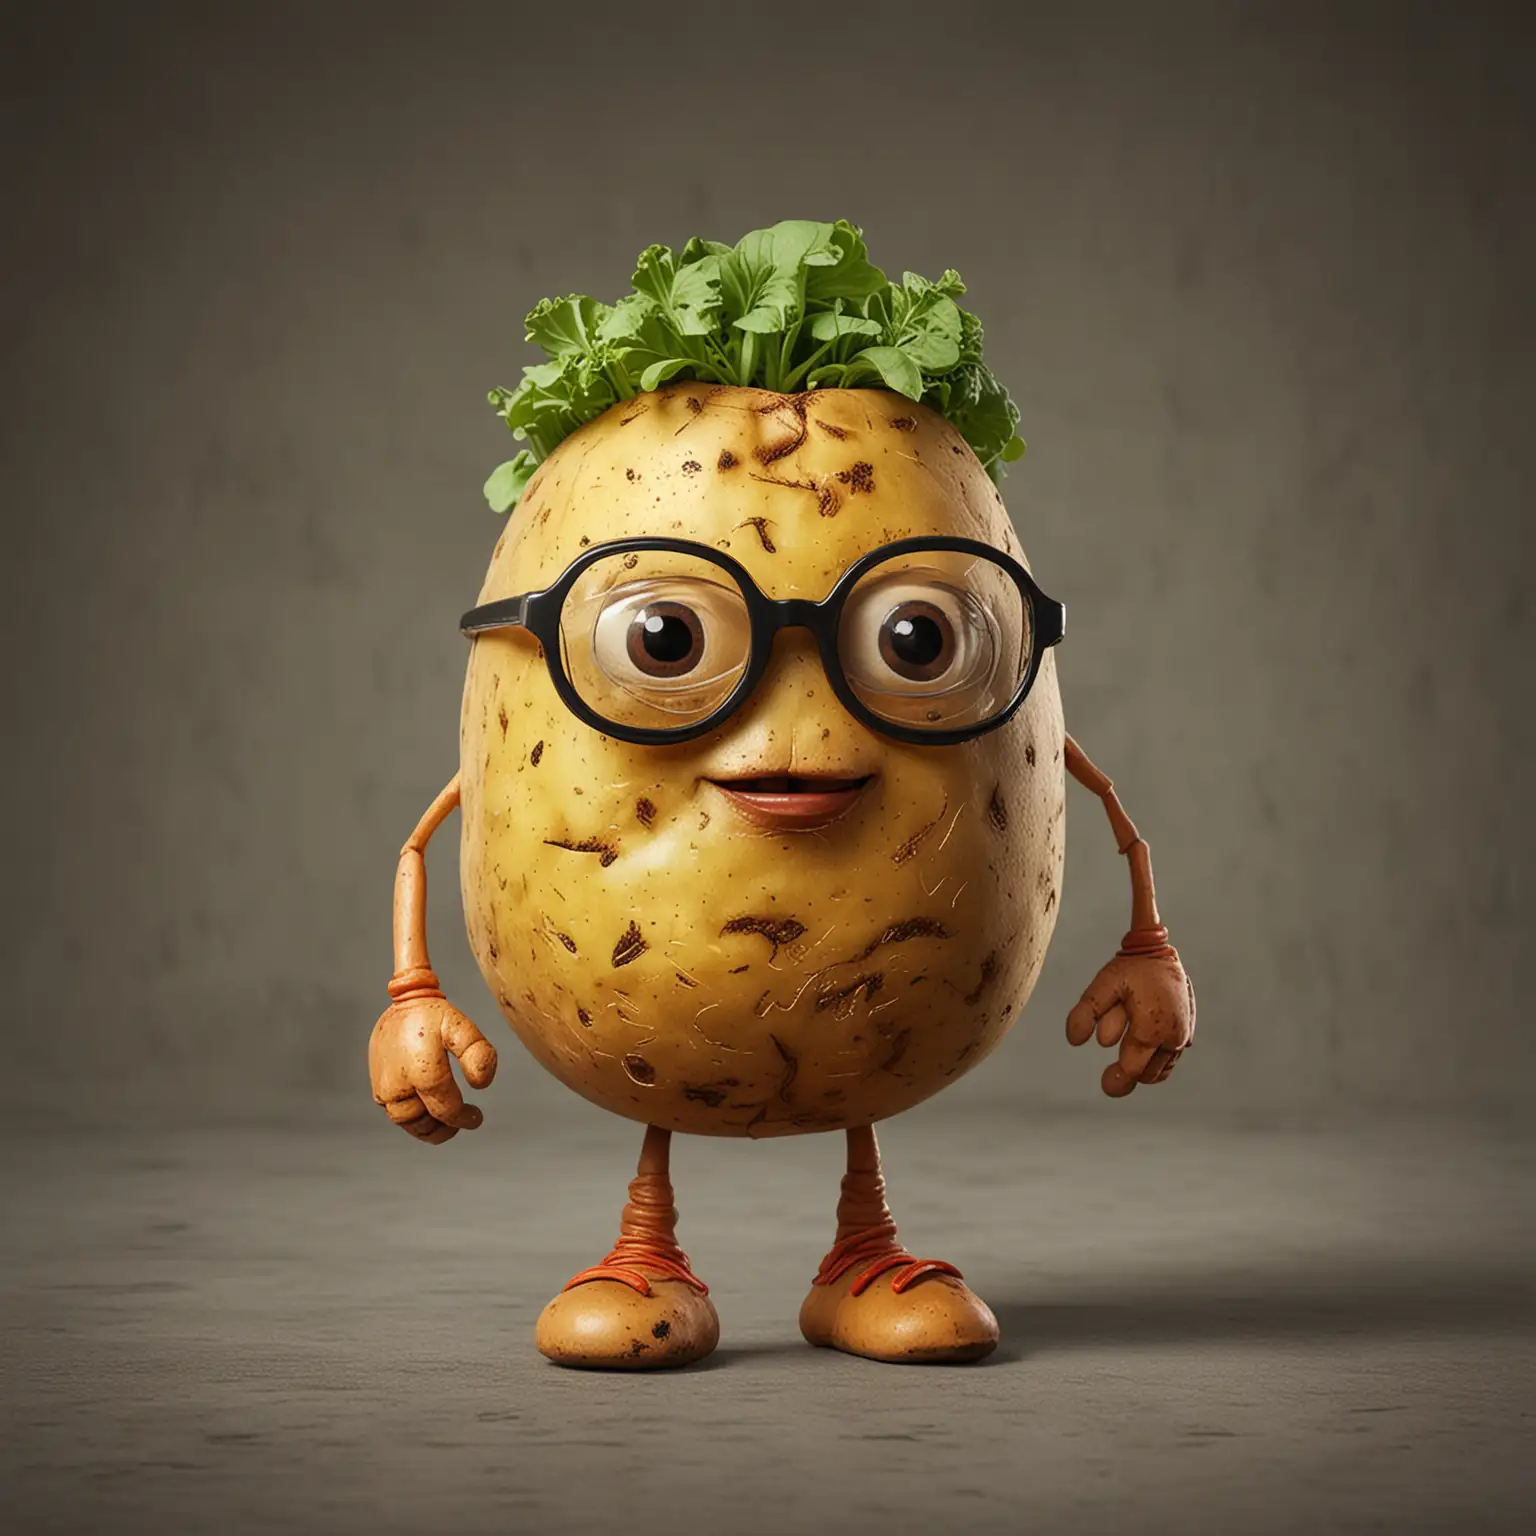 Funny Potato Character with Glasses and Legs